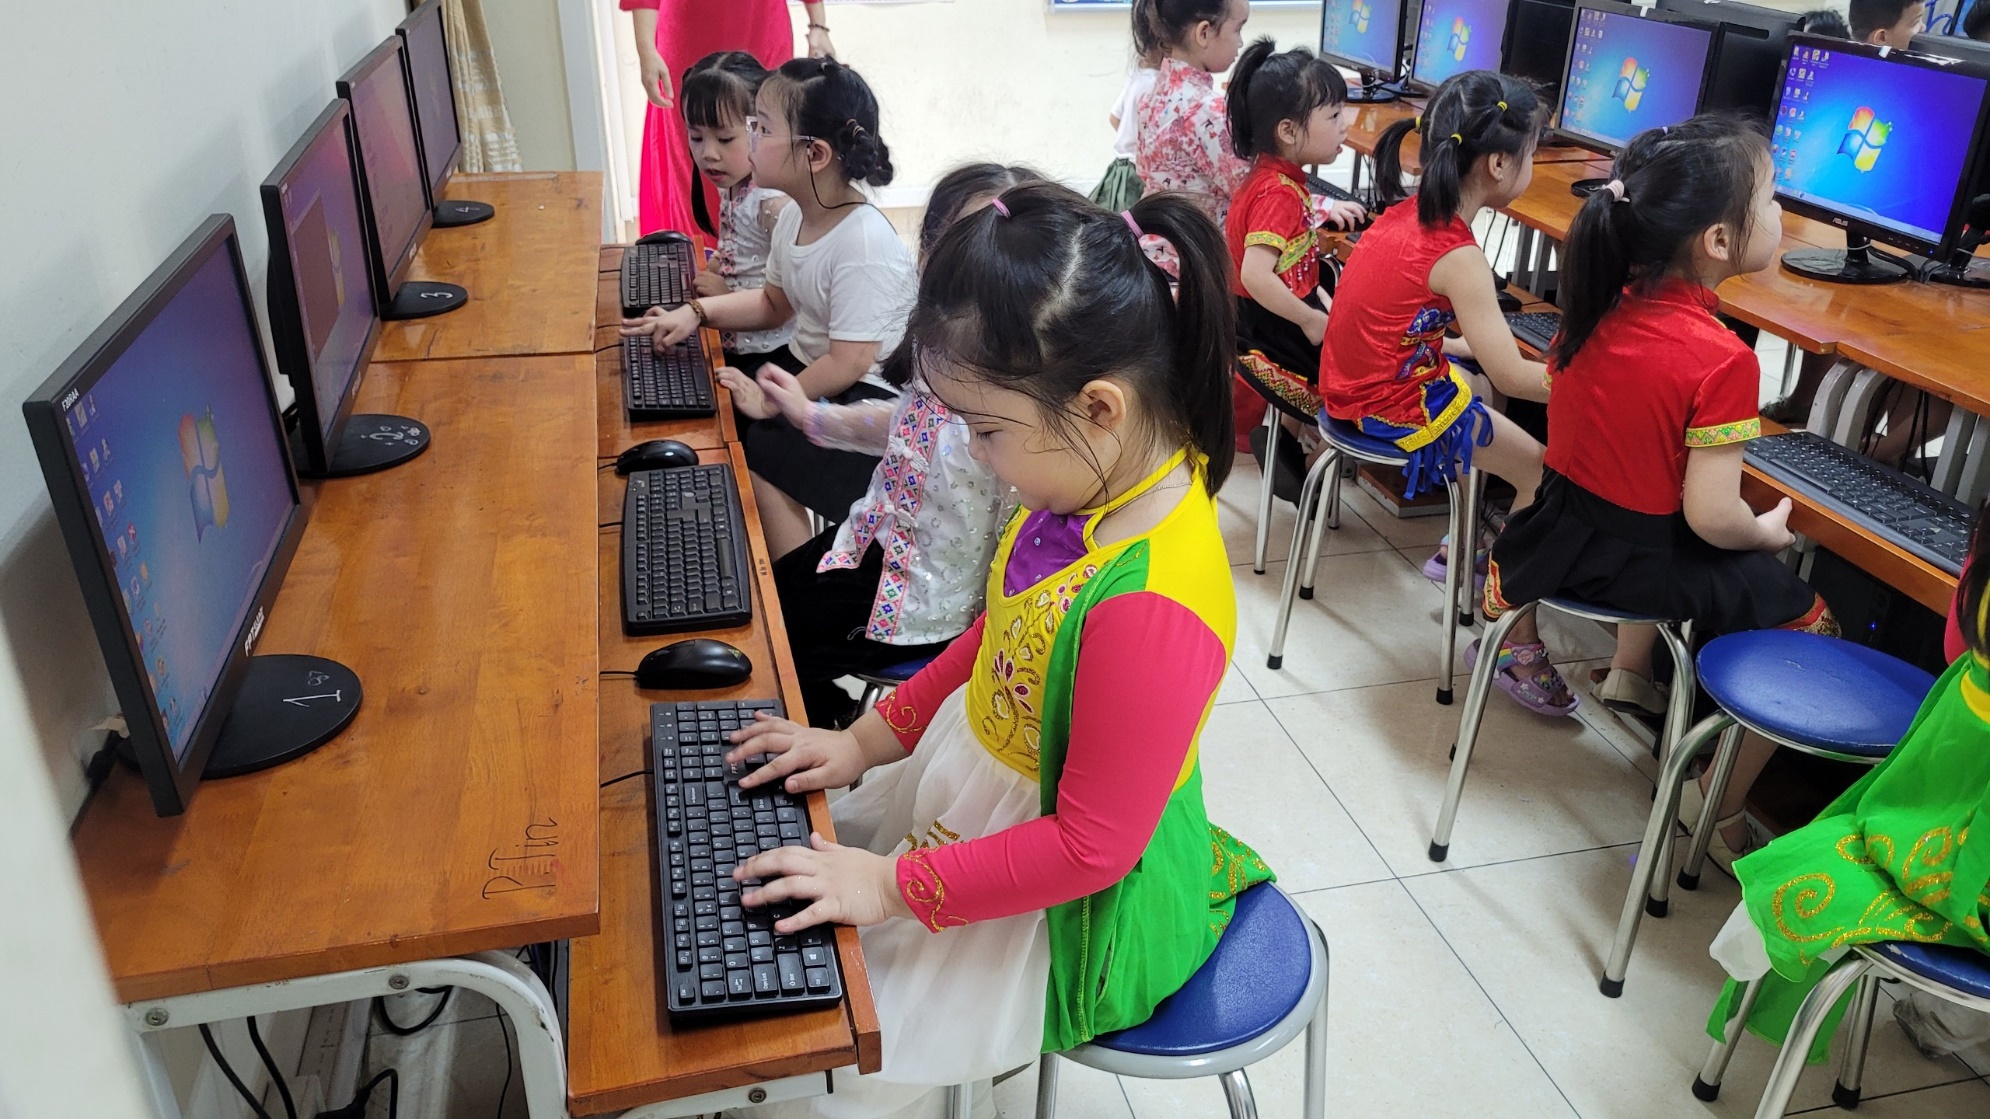 A group of children sitting at a desk using computers

Description automatically generated